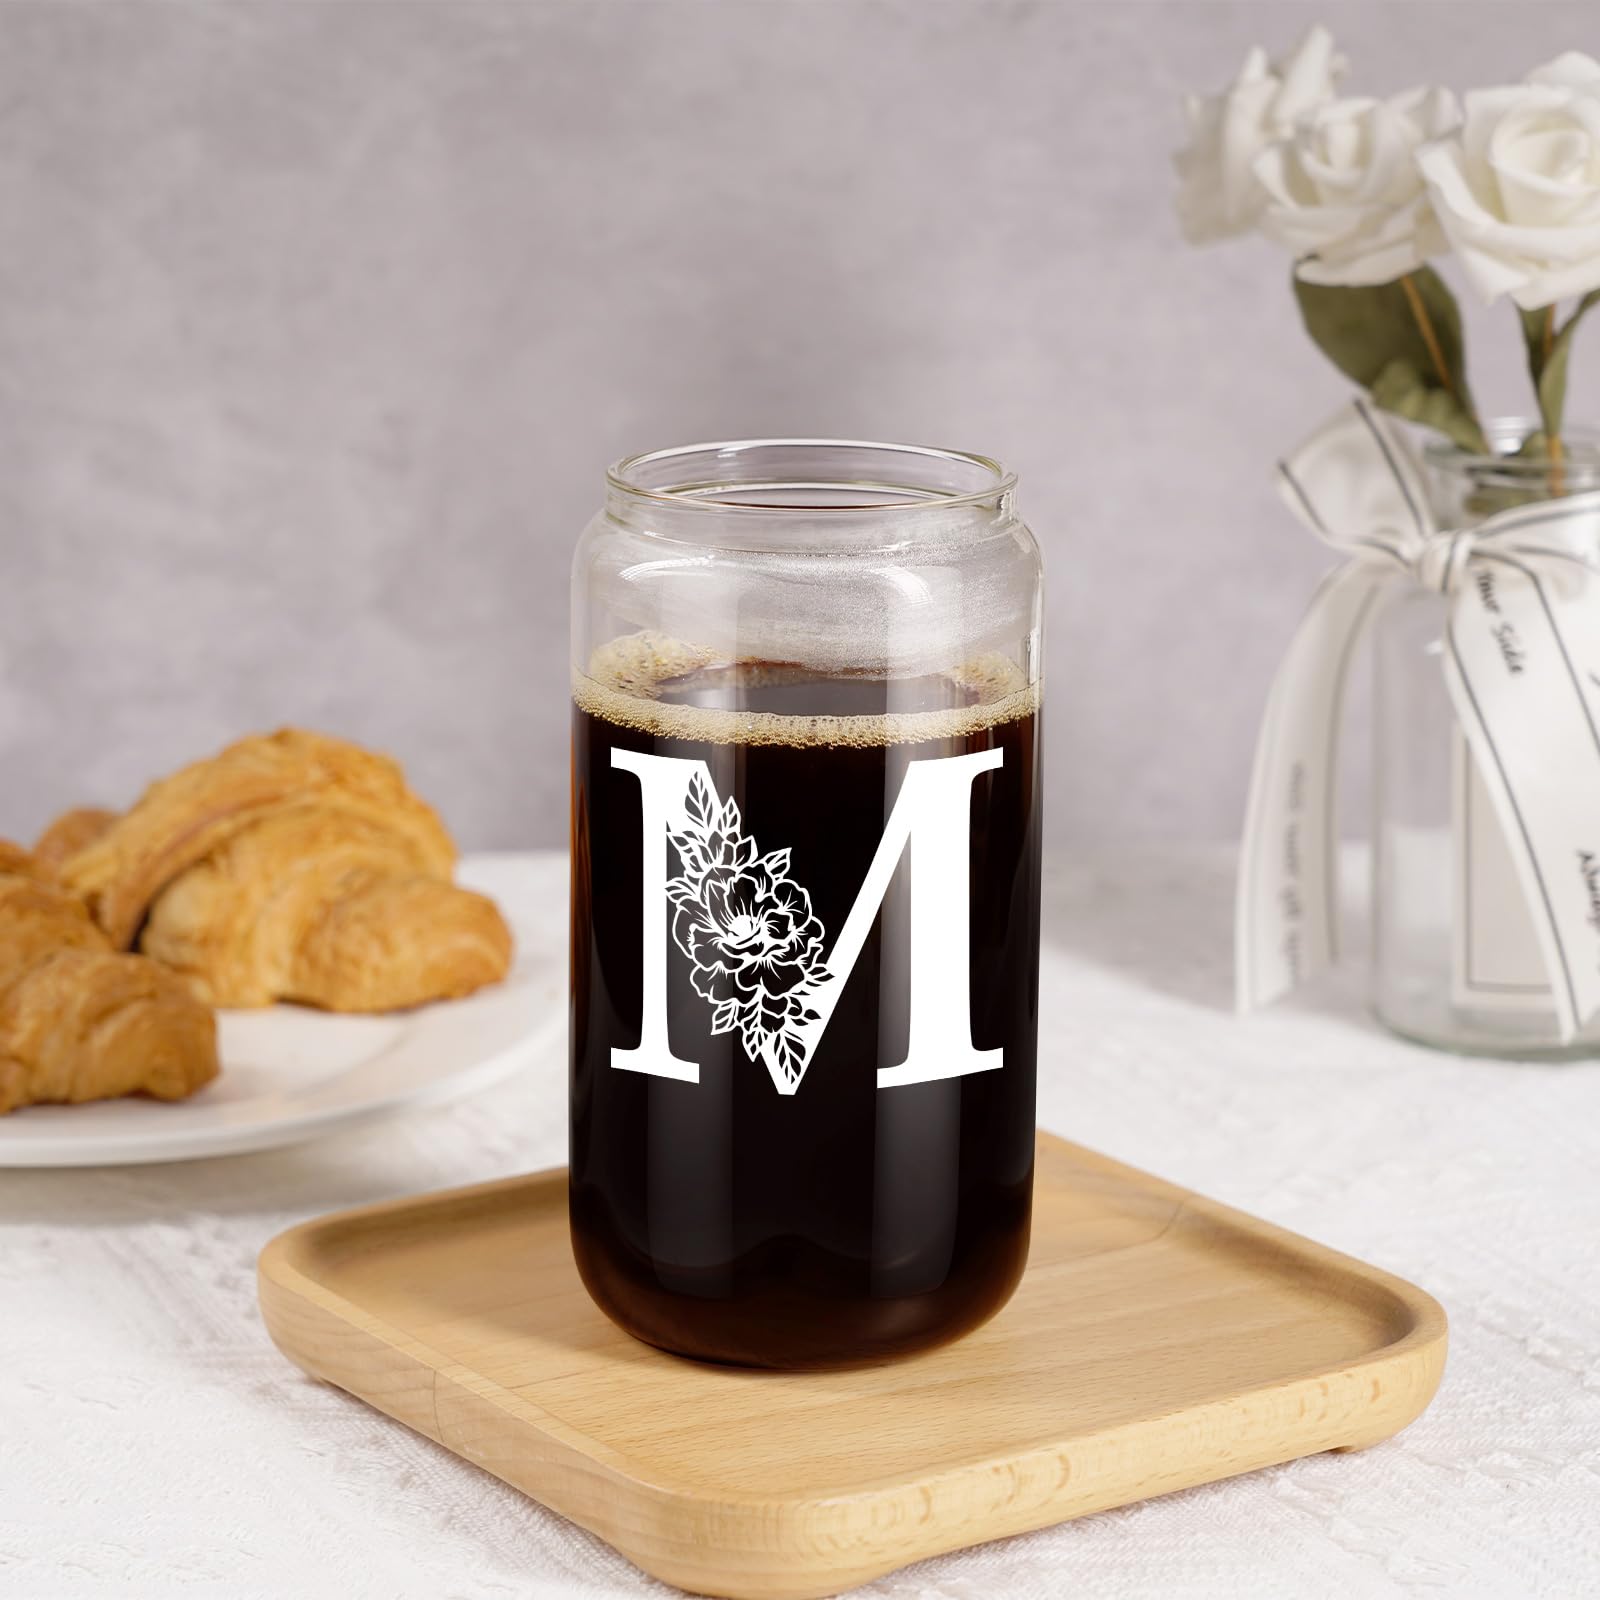 Coolife Initial Glass Cup, Monogrammed Gifts for Women, 16 oz Glass Cups w/Lids Straws, Iced Coffee, Smoothie, Beer Glass Tumbler w/Straw Lid - Personalized Mothers Day, Birthday Gifts for Her Mom